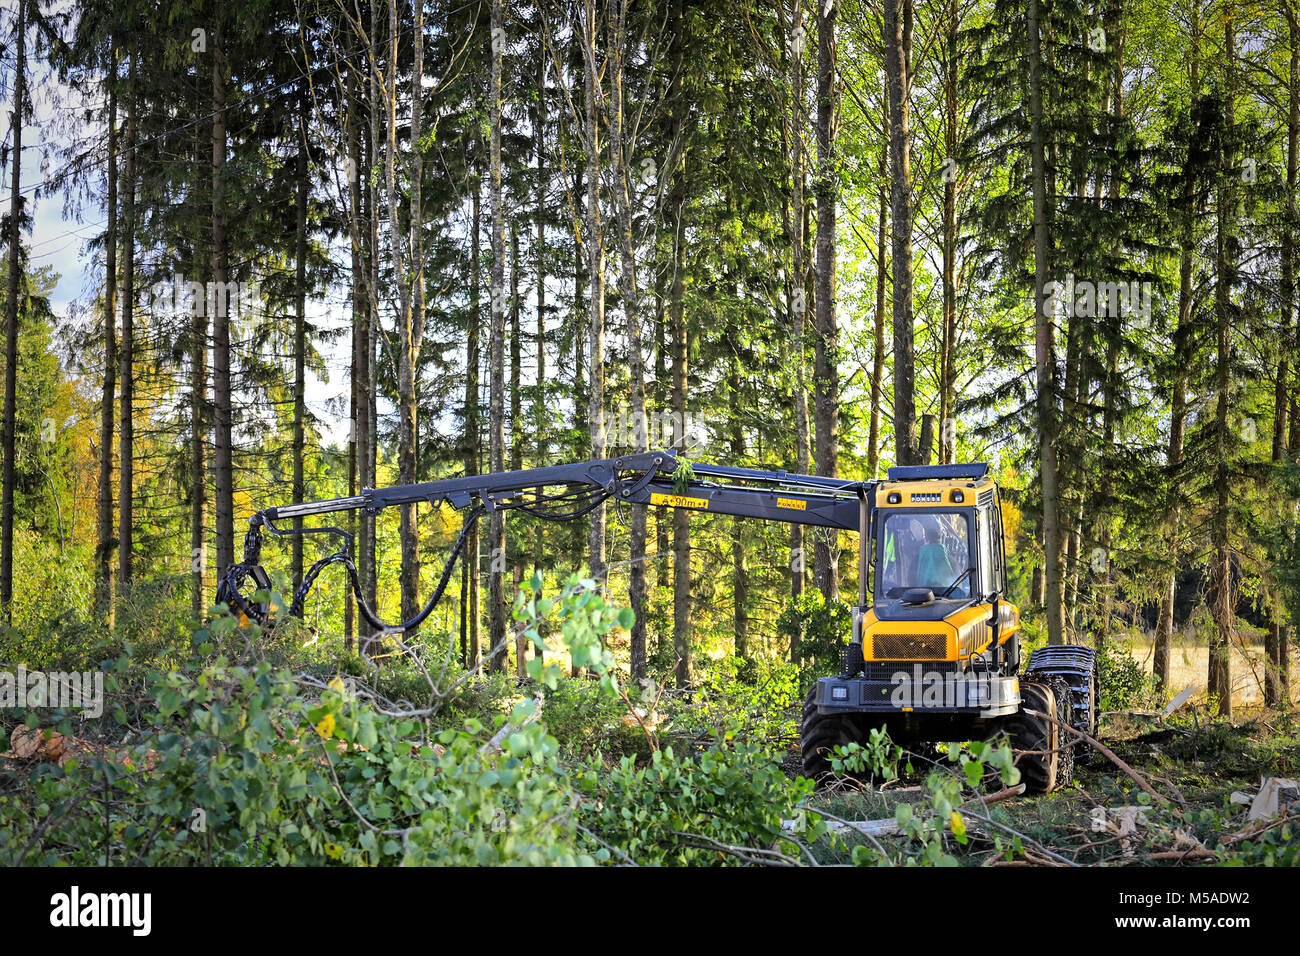 JOKIOINEN, FINLAND - SEPTEMBER 15, 2017: Forestry machine operator works in forest with Ponsse Ergo Harvester in early autumn. Stock Photo